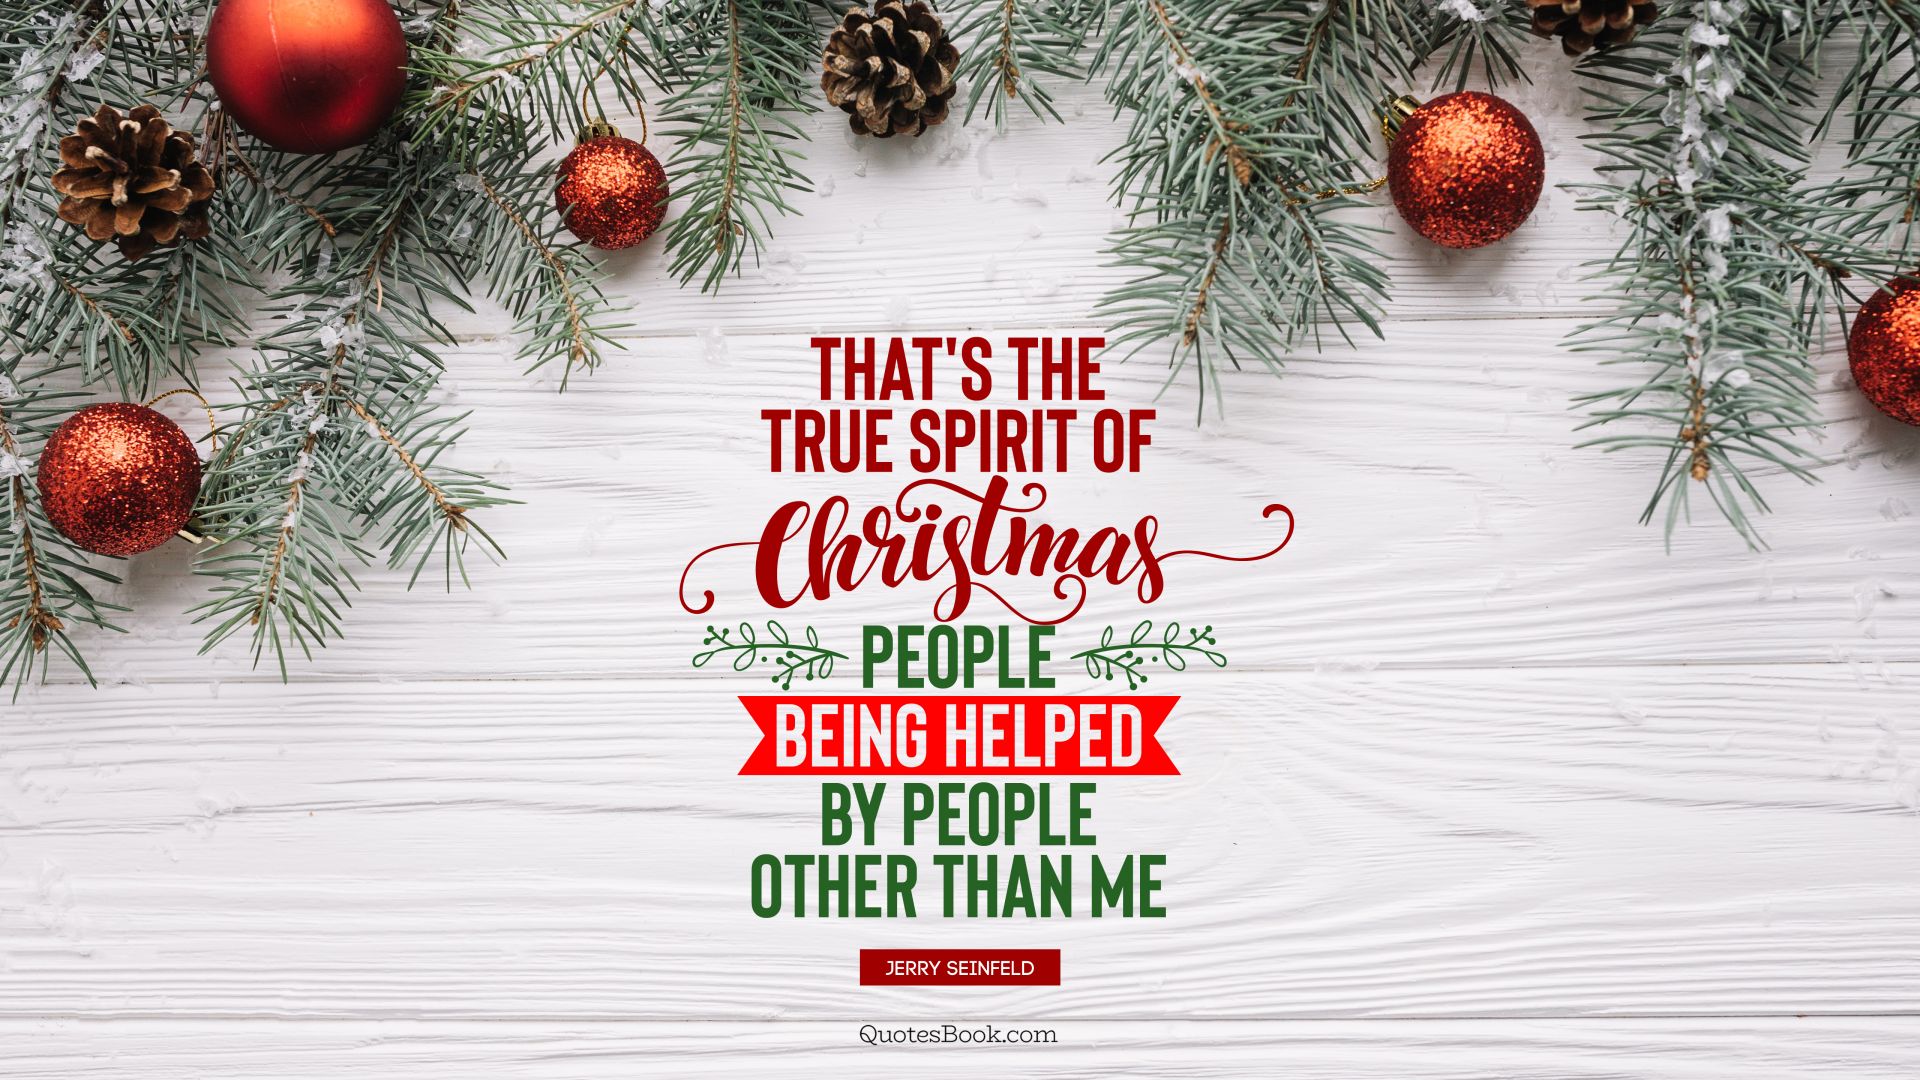 That's the true spirit of Christmas; people being helped by people other than me. - Quote by Jerry Seinfeld